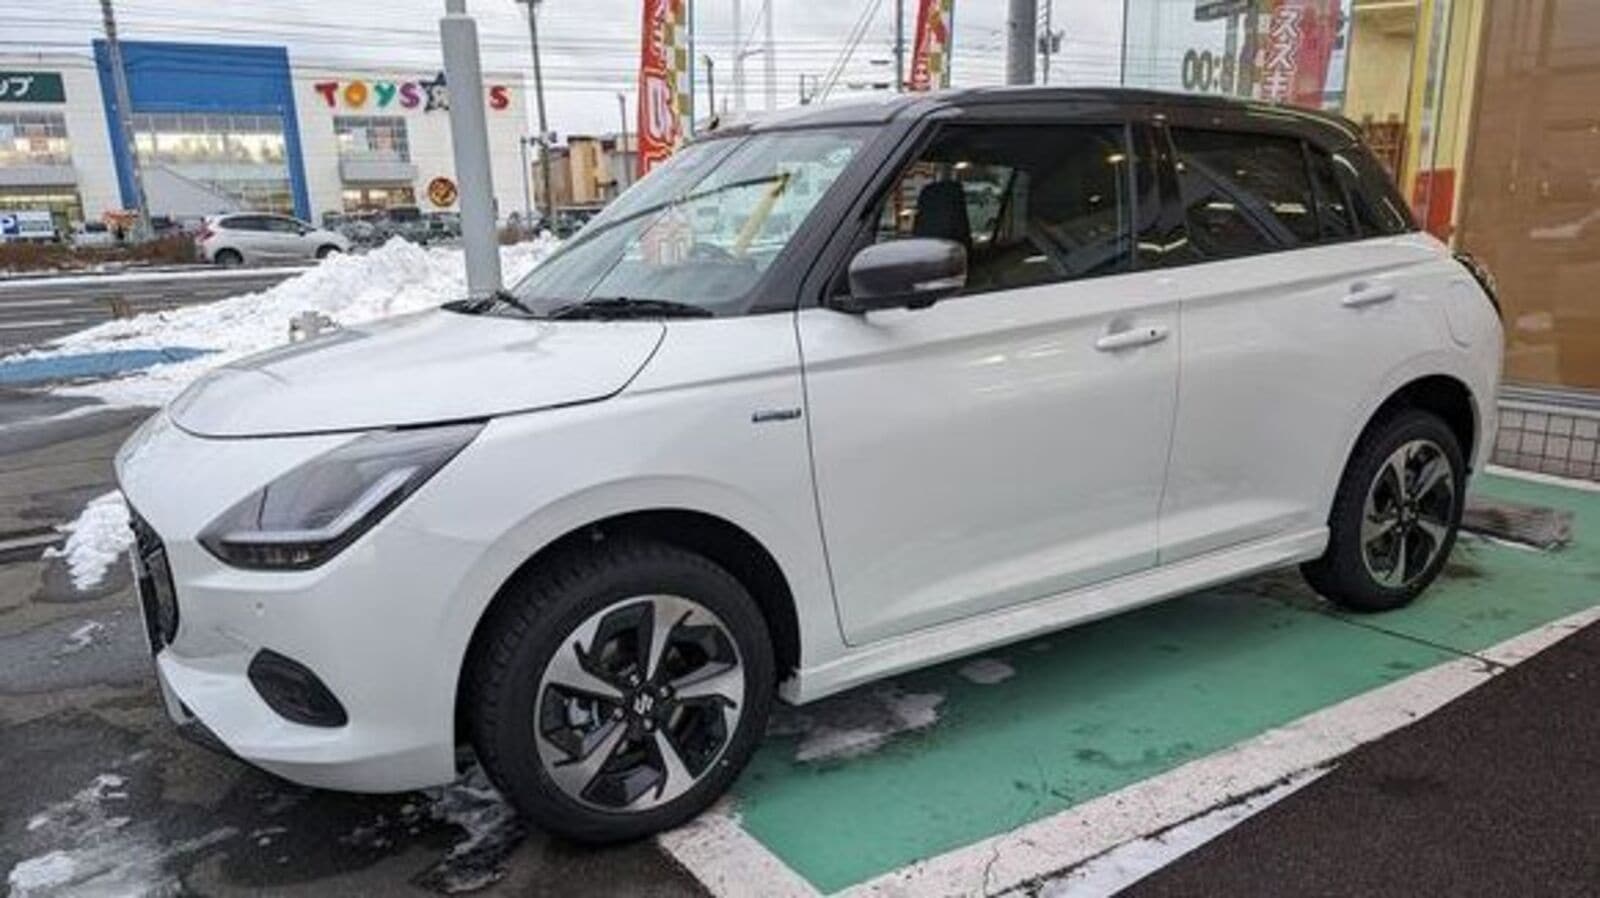 2024 Suzuki Swift arrives at showrooms in Japan. Check out real-life images